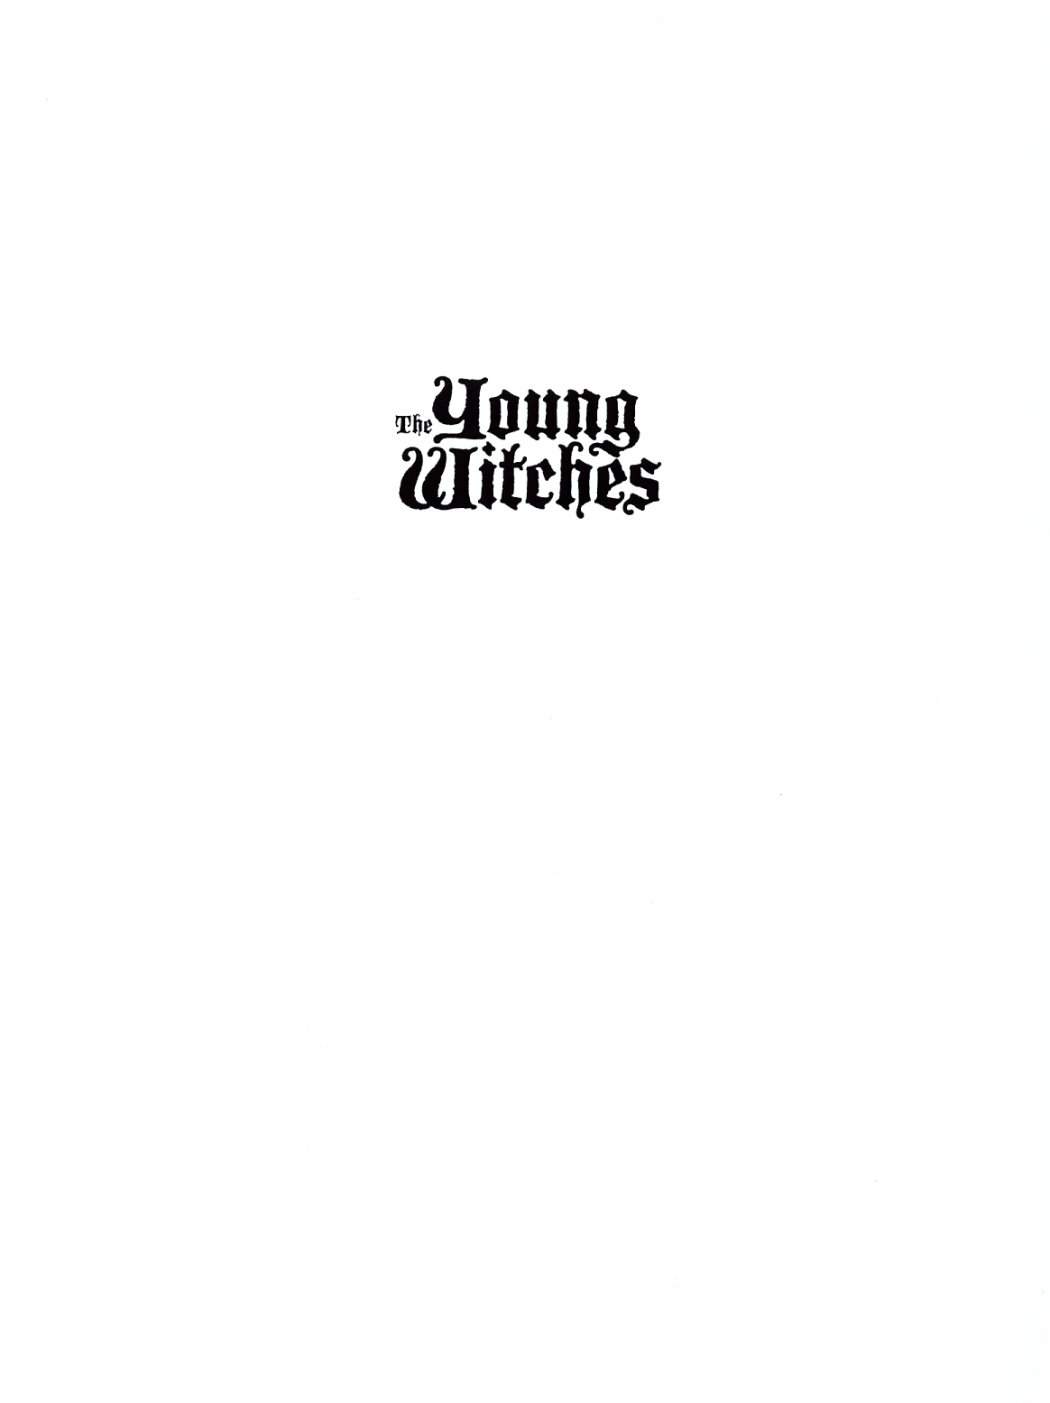 [Solano Lopez & Barreiro/Pol] The Young Witches (Complete) [RUS] 